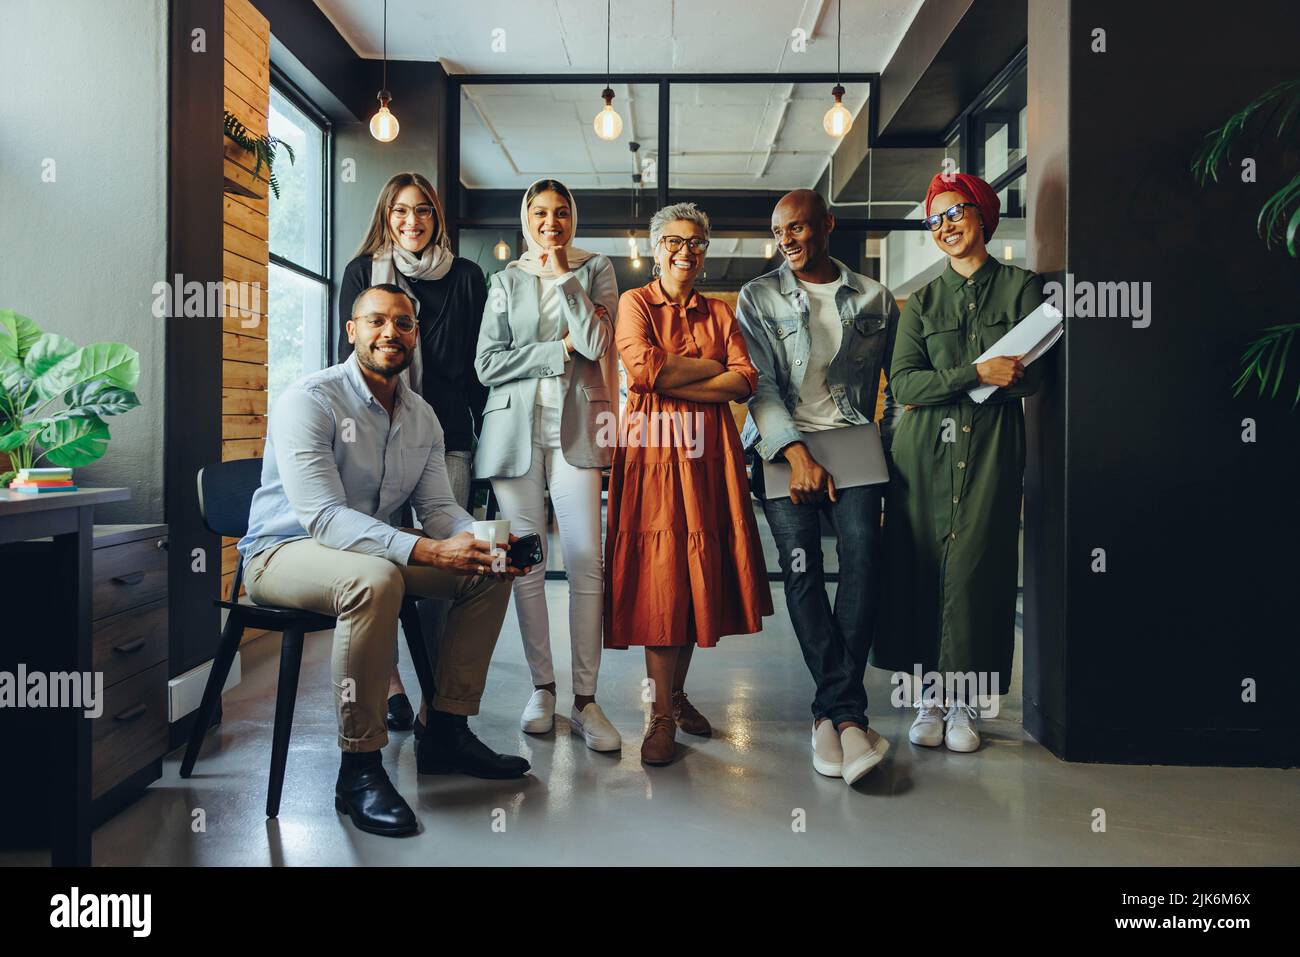 Successful business professionals smiling cheerfully in a modern office. Group of multicultural businesspeople running a creative startup in an inclus Stock Photo